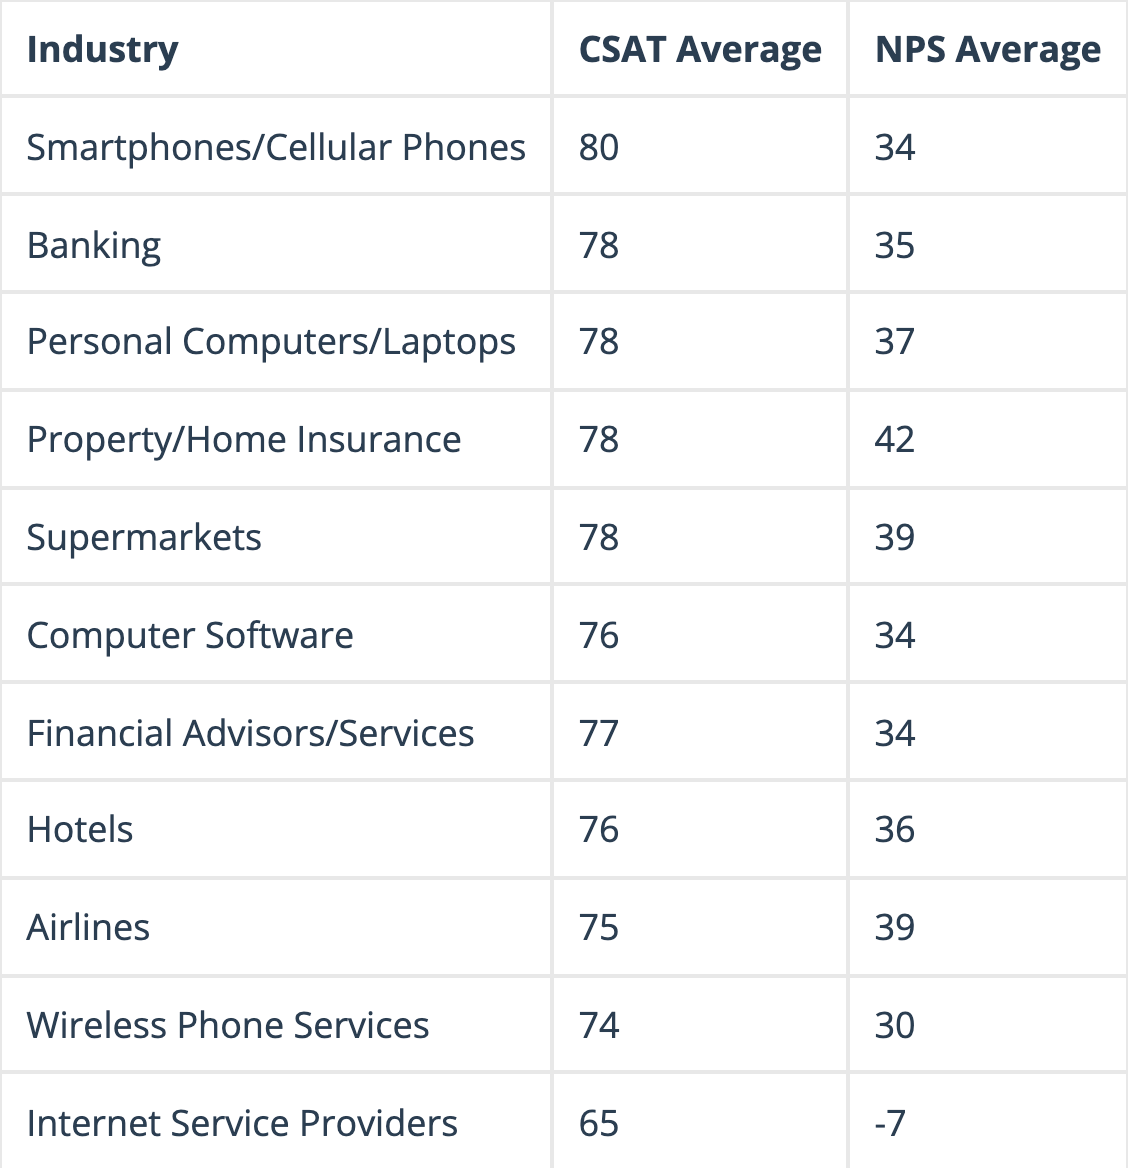 CSAT and NPS Industry Averages